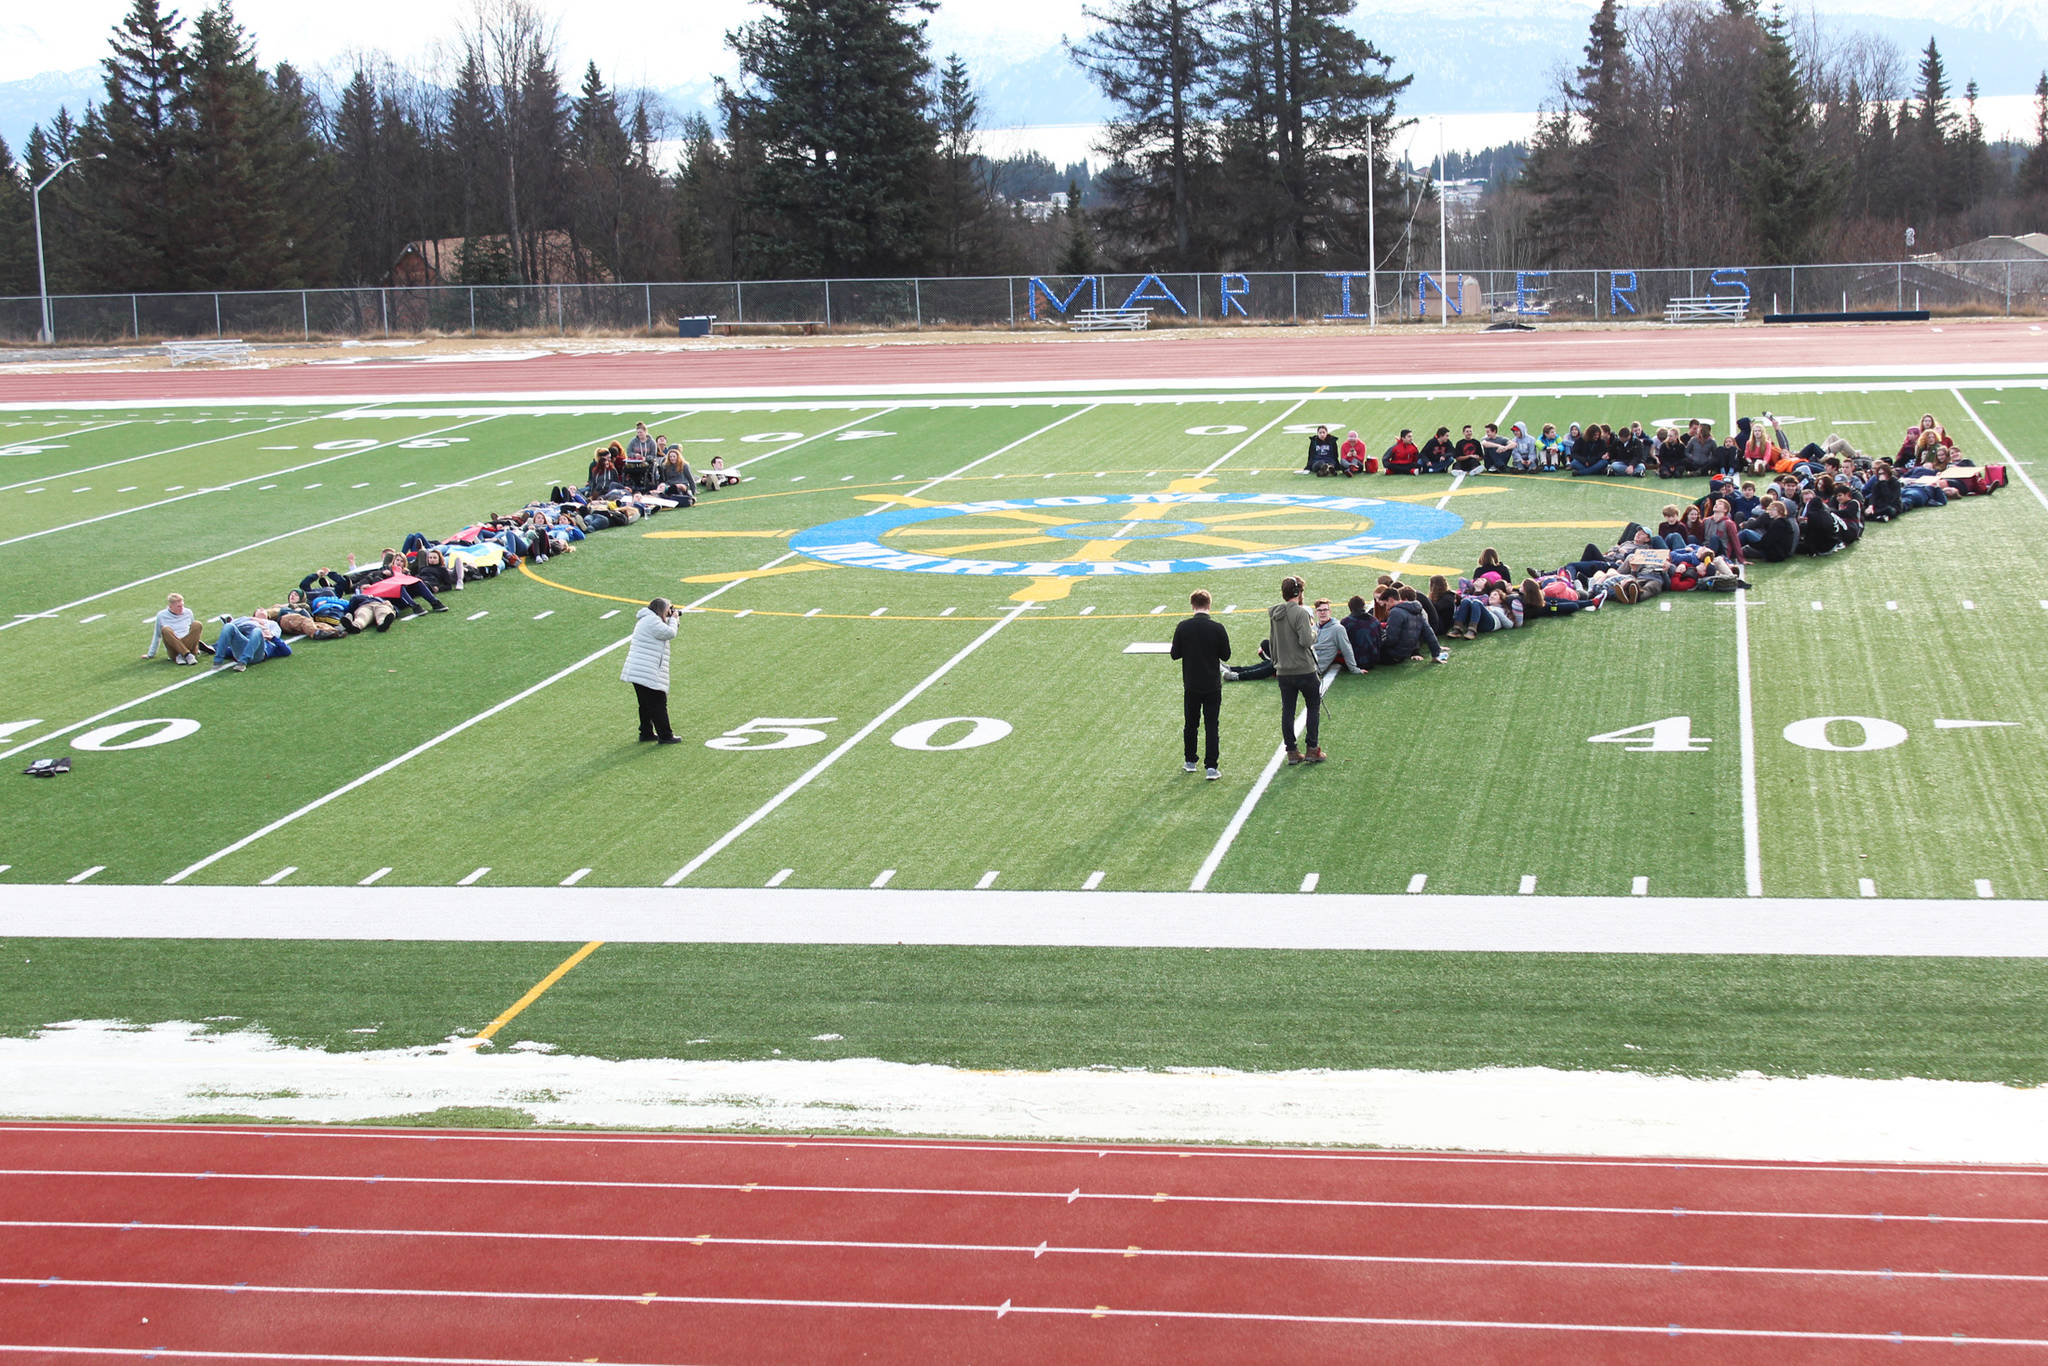 About 100 Homer High School students lie down on the school’s football field to form the number 17 on Wednesday, Feb. 21, 2018, to honor the students who were killed in the Feb. 14 mass shooting in Parkland, Florida. The Homer students staged a walkout at noon to advocate for safer schools. (Homer News file photo)